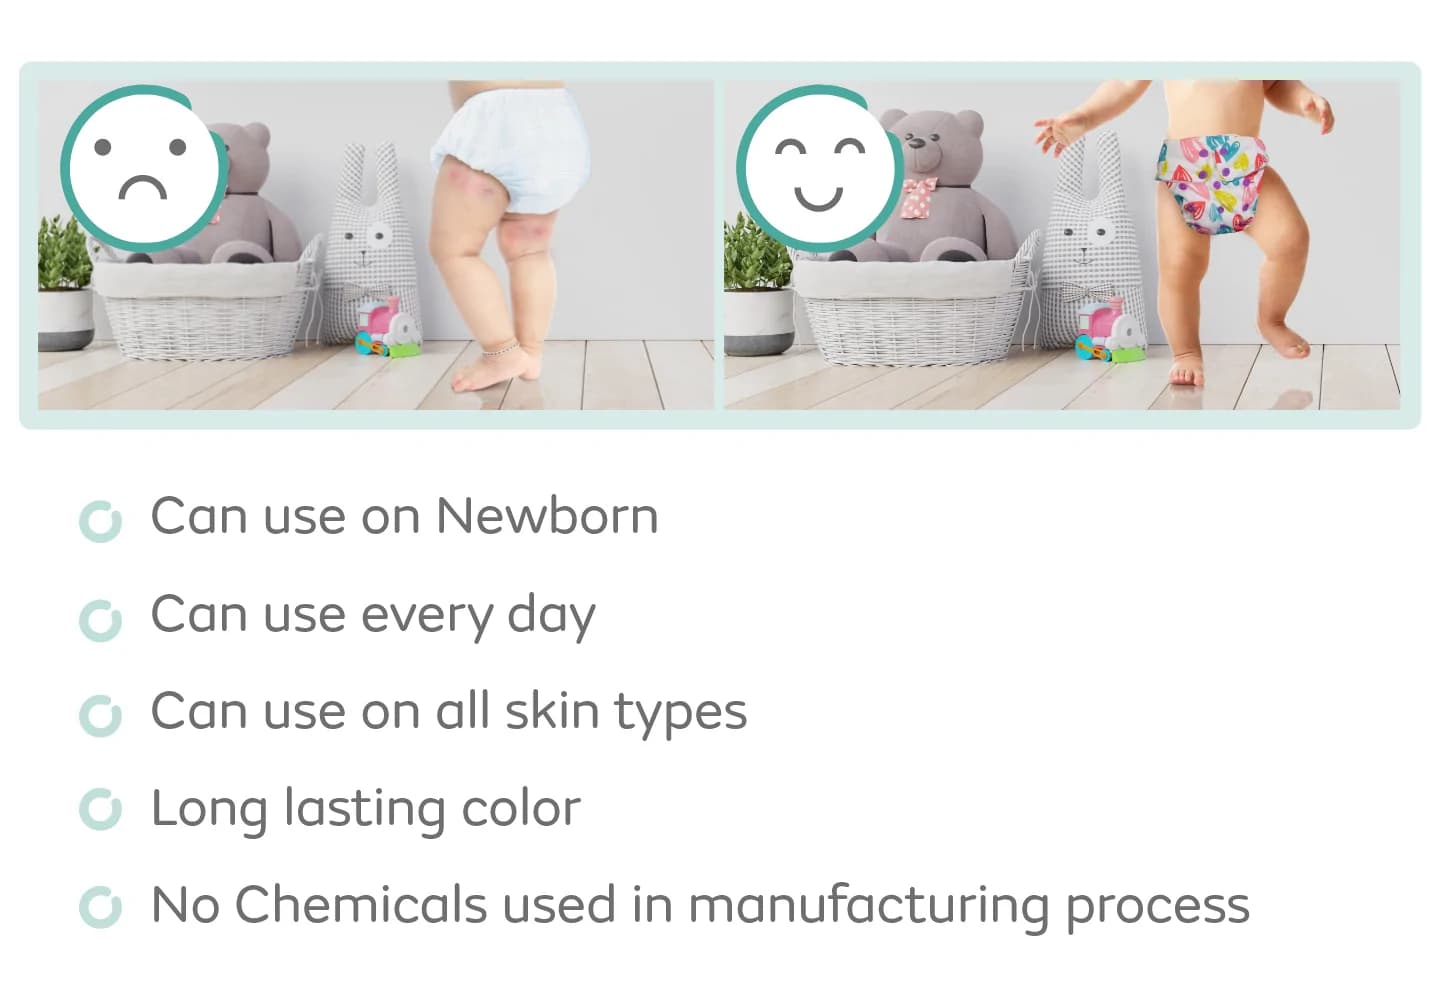 Adjustable Washable & Reusable Cloth Diaper With Dry Feel, Absorbent Insert Pad (3M-3Y) | Oeko-Tex Certified | Prevents Rashes - Rainbow, Floral Spring, Heart Doodles + Gentle Baby Wipes with Organic Coconut oil & Neem - Pack of 3  WHAT IS IT?